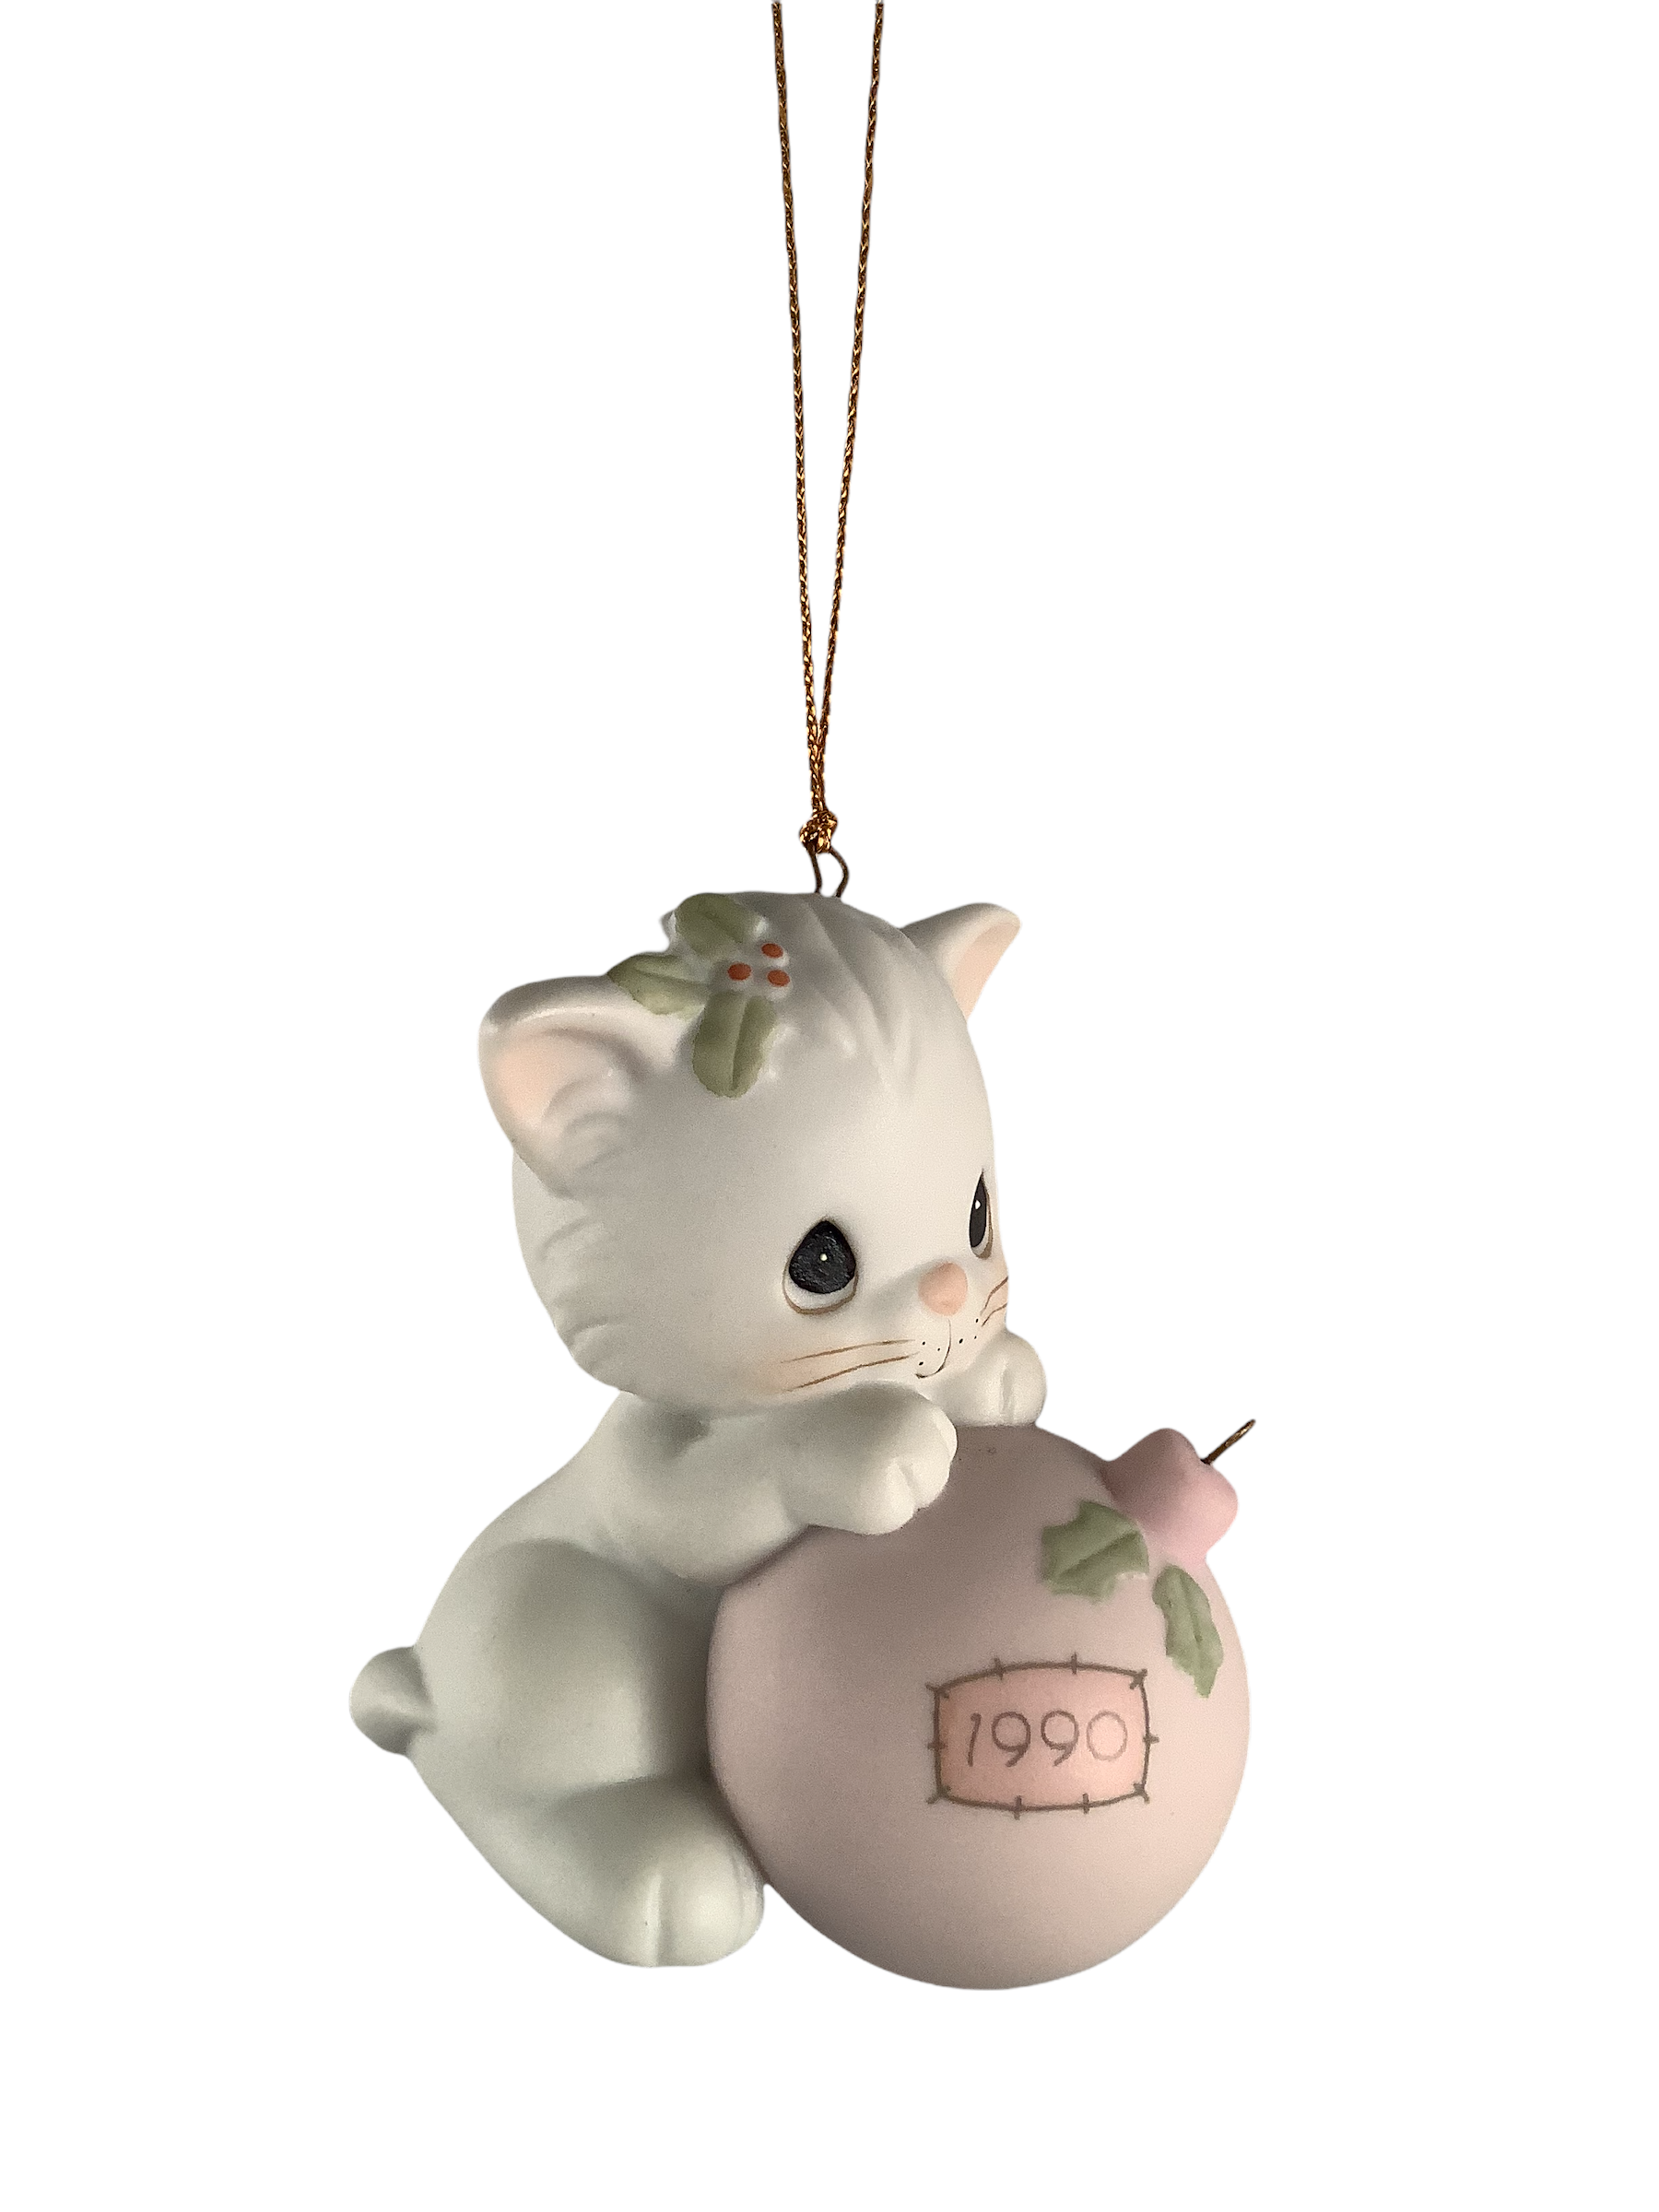 Wishing You A Purr-fect Holiday - Precious Moment Ornament